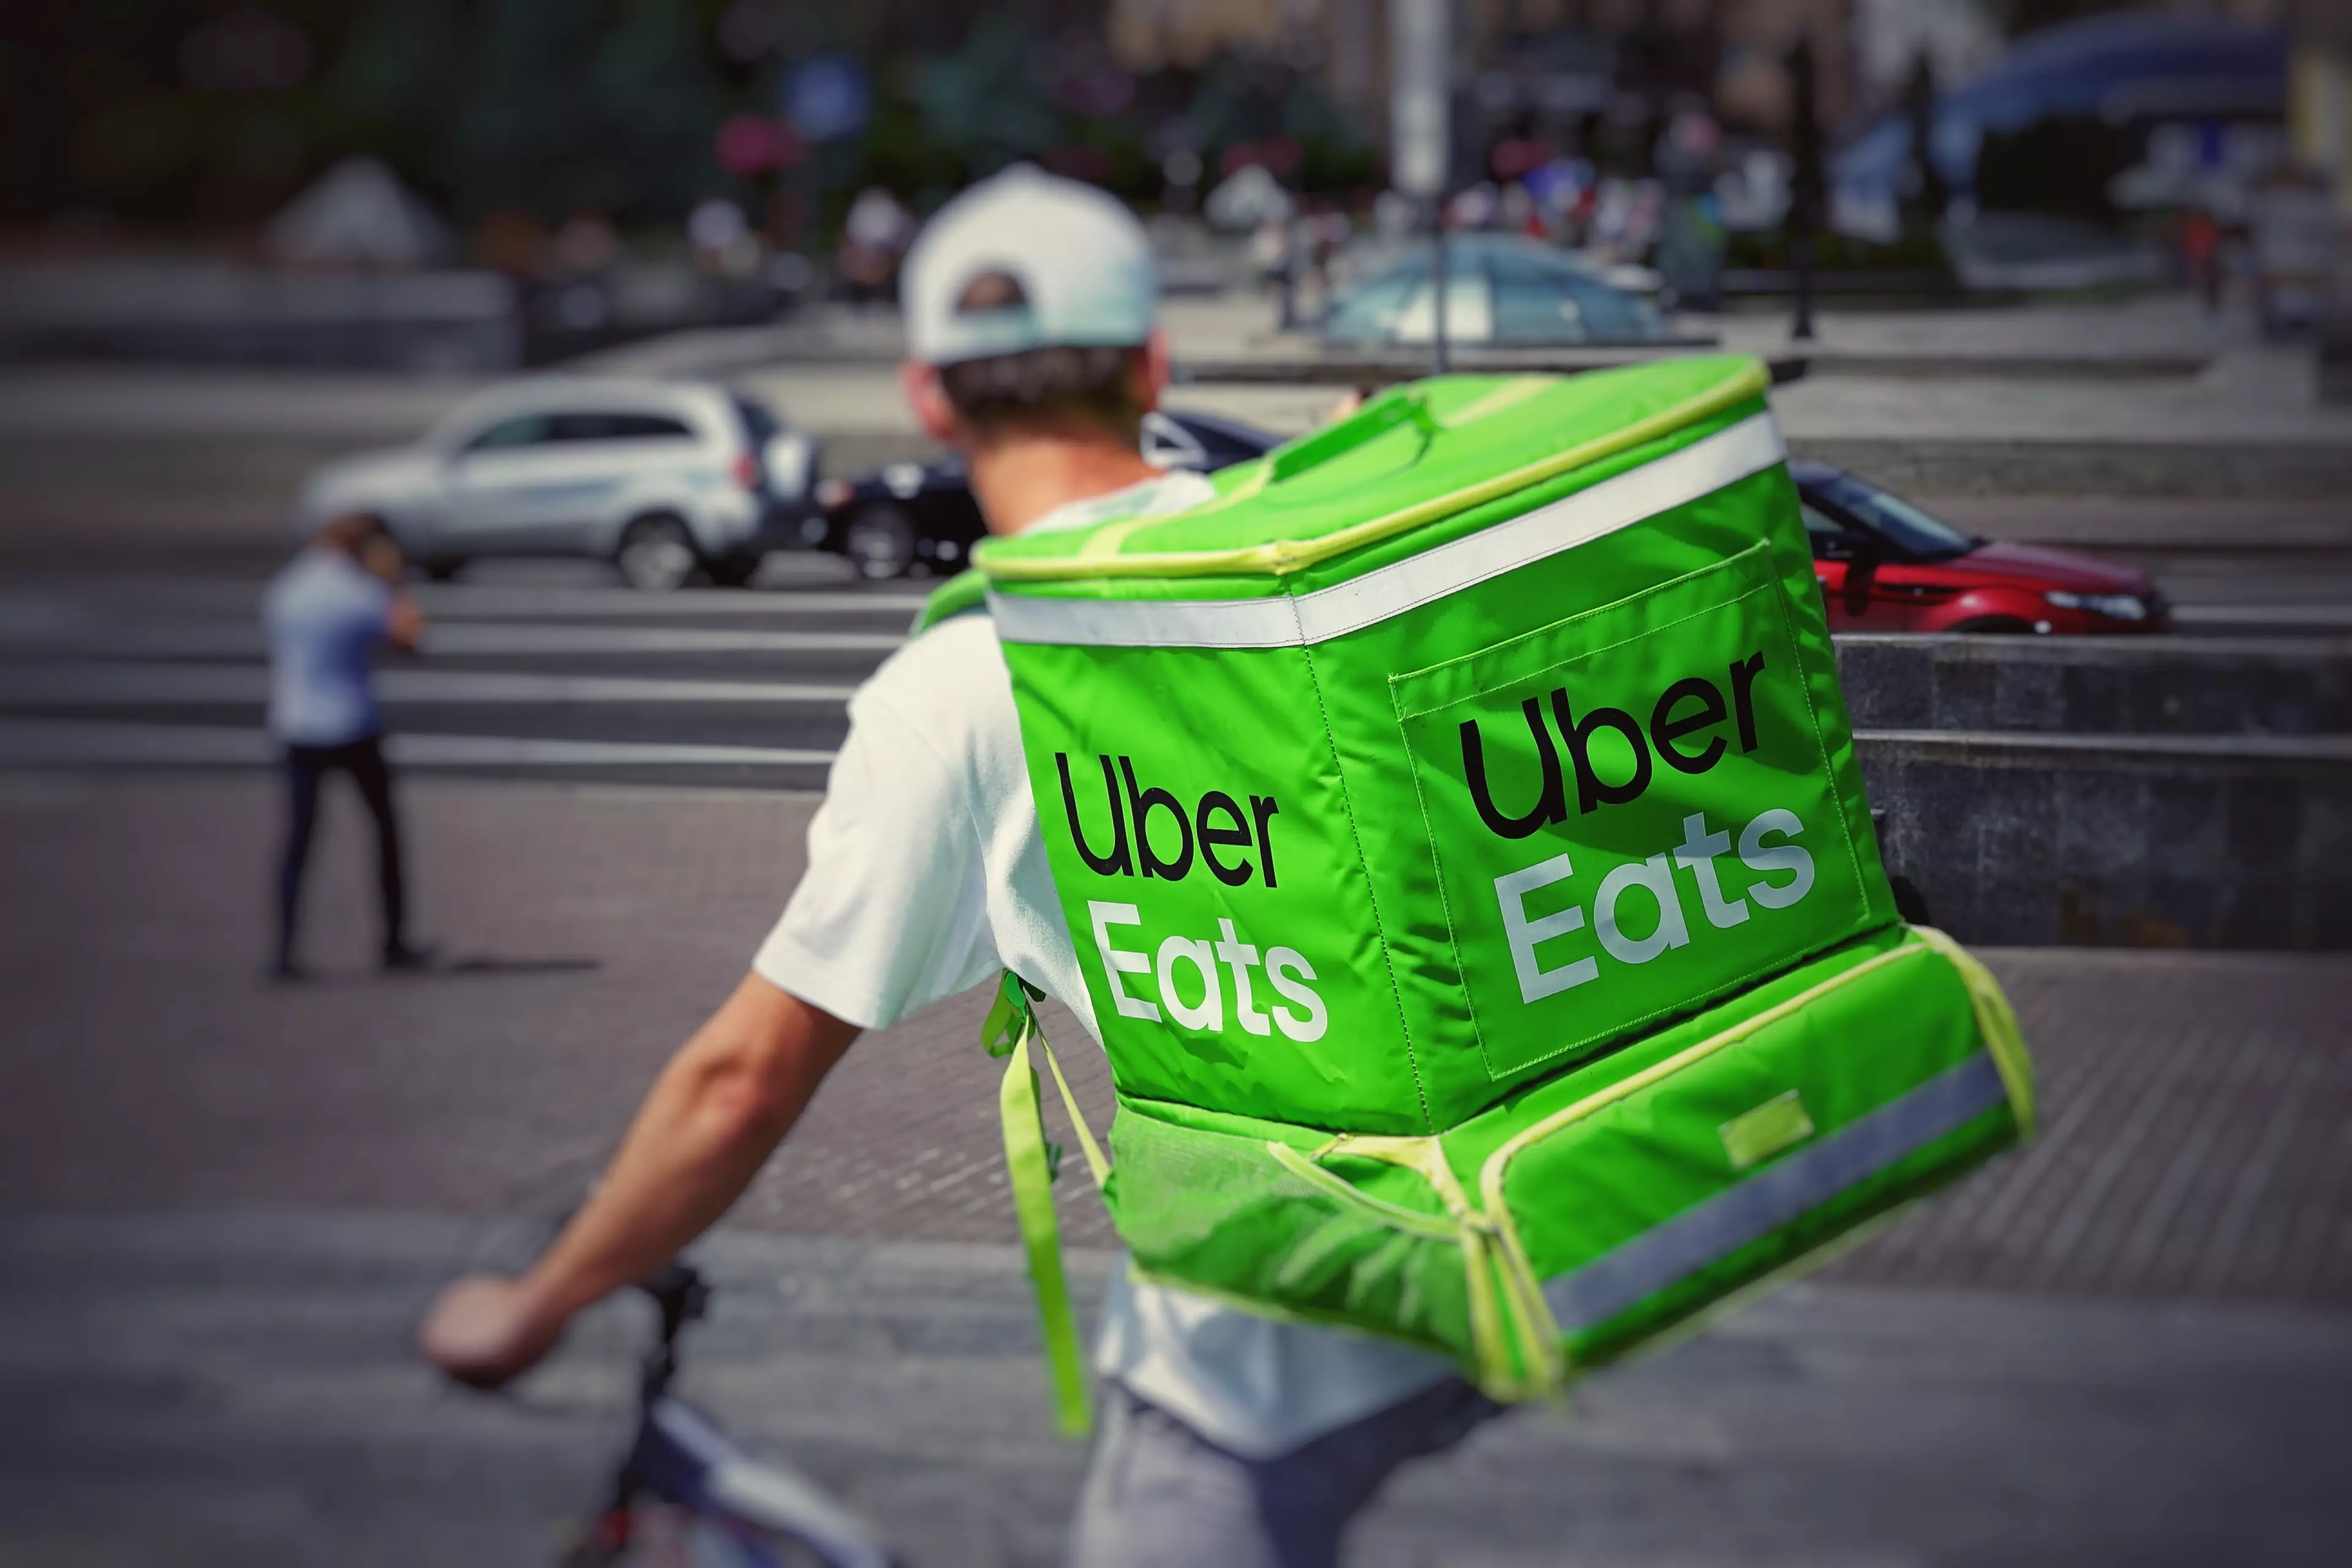 Uber Eats delivery driver (